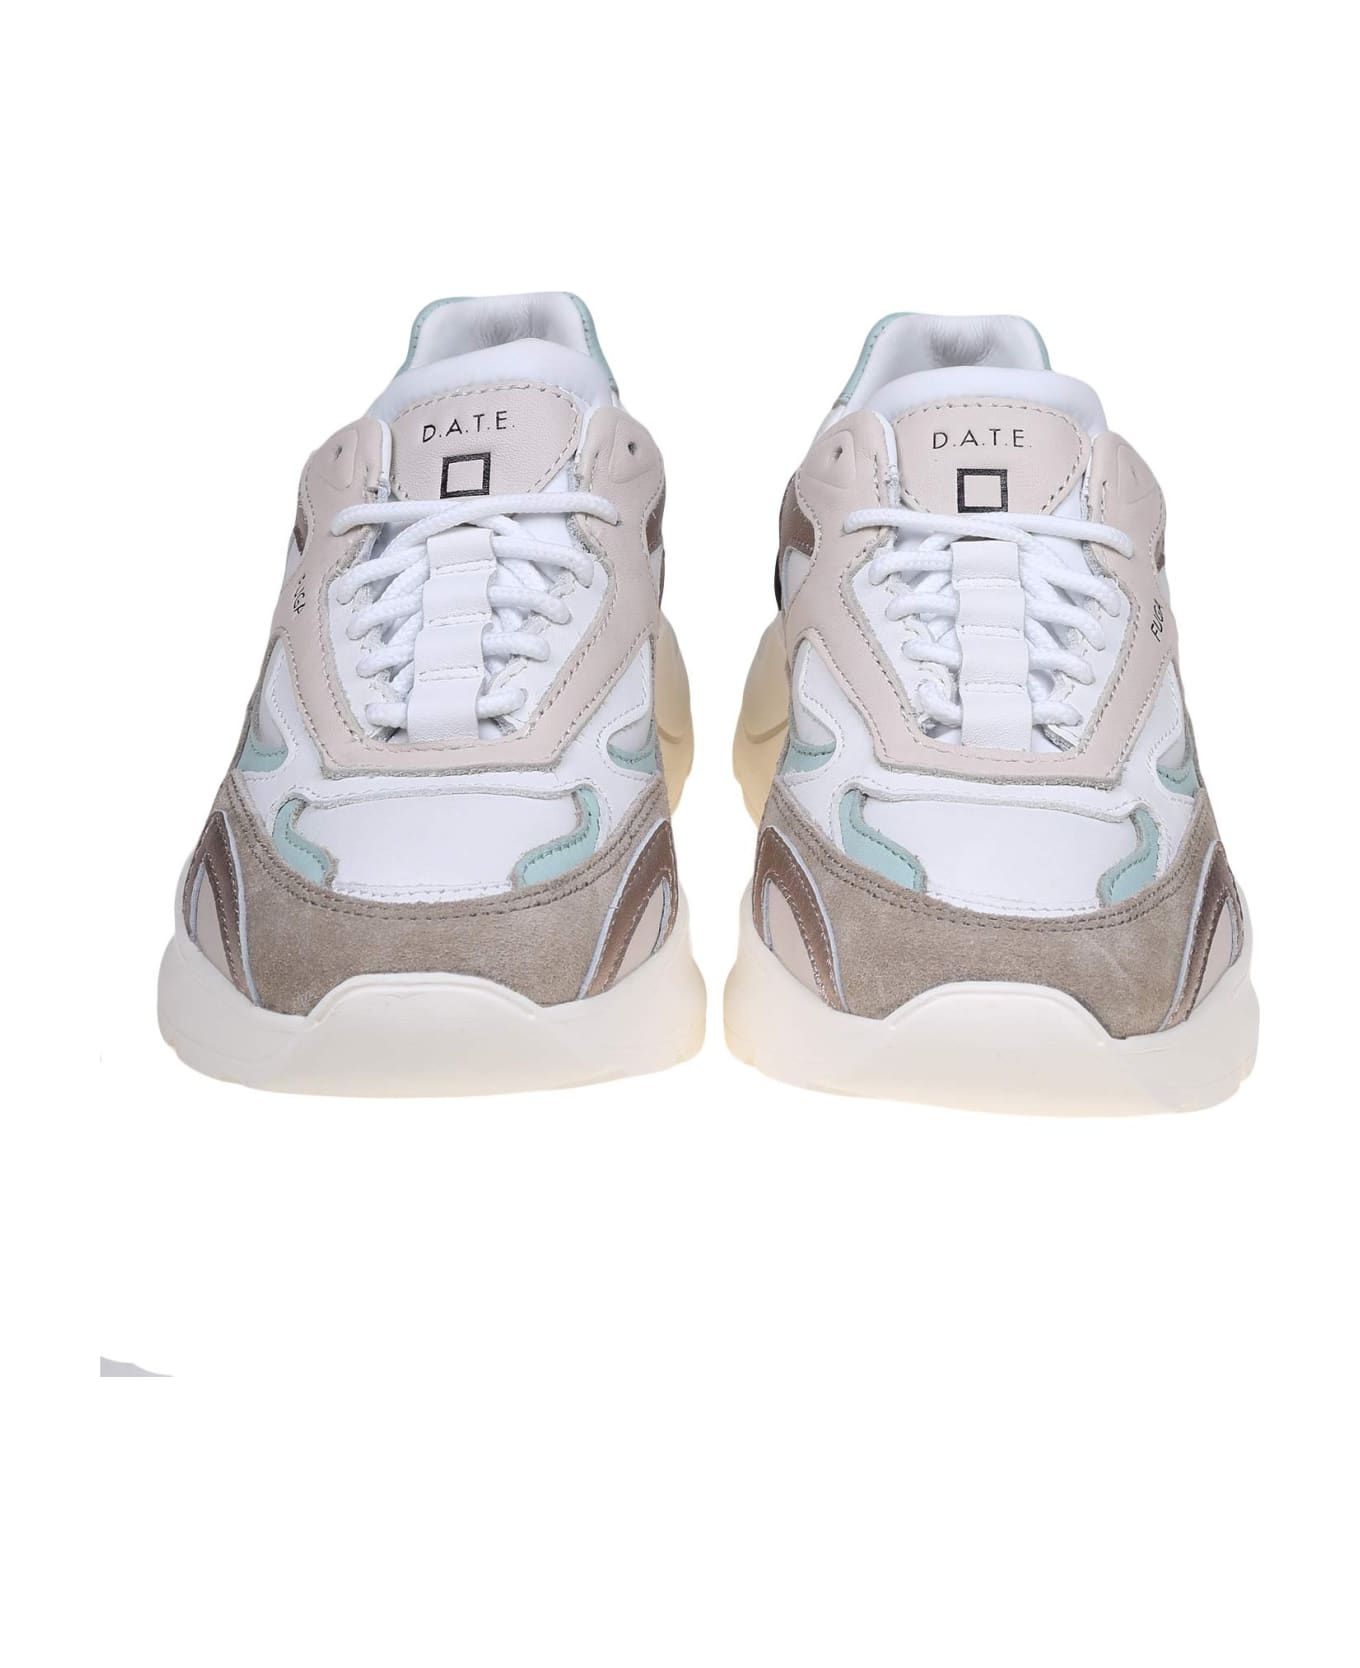 D.A.T.E. Fuga Sneakers In White/ Cream Leather And Suede - Cream